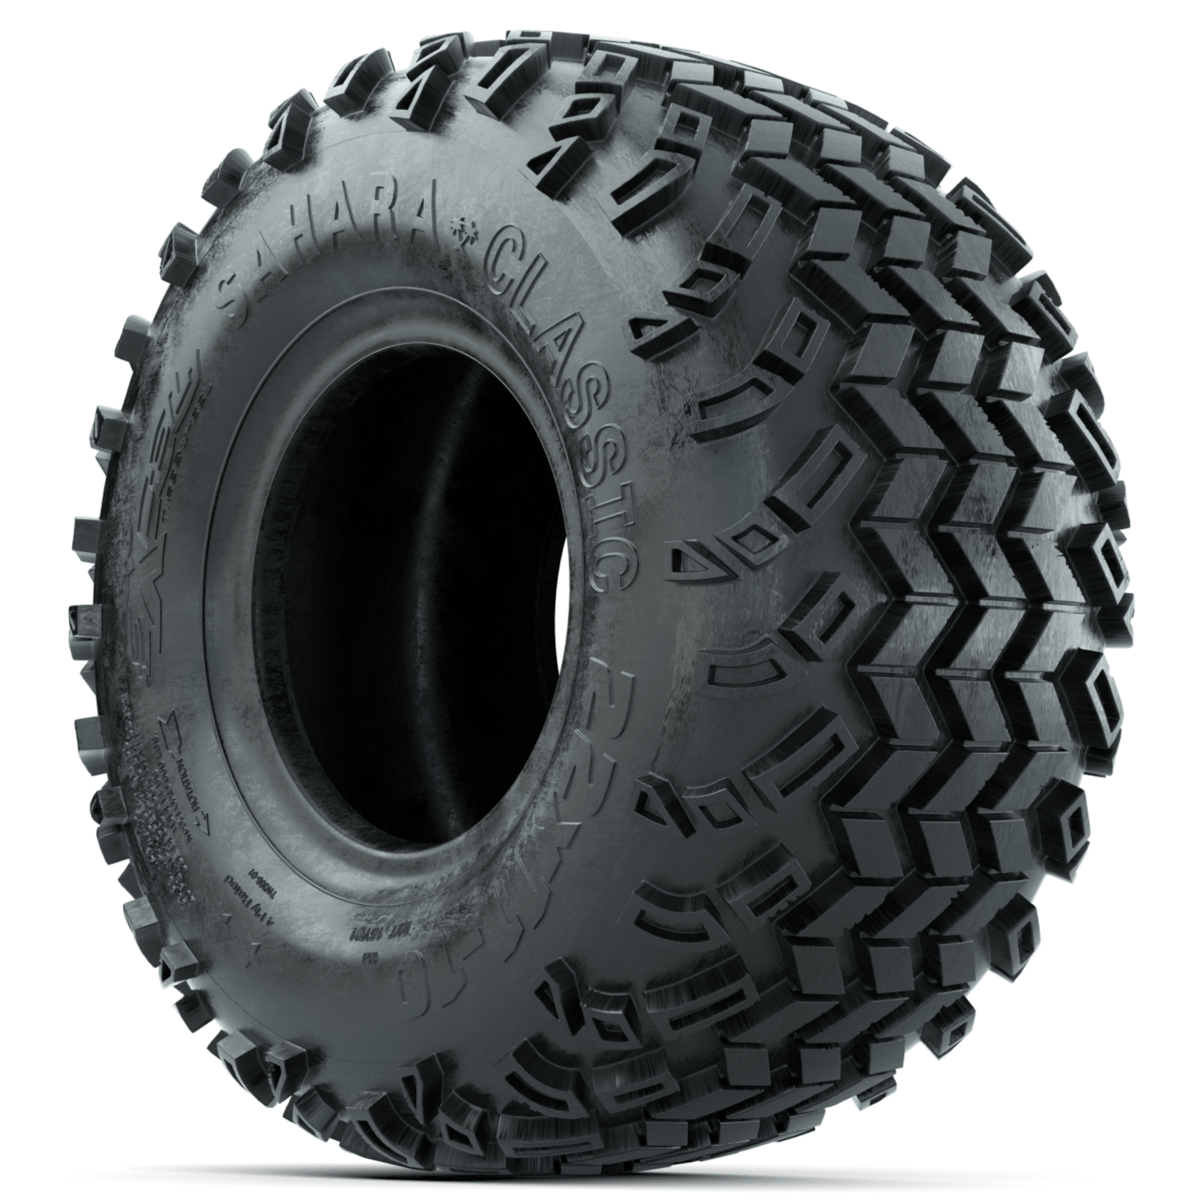 22x11-10 Sahara Classic A/T Tire (Lift Required)